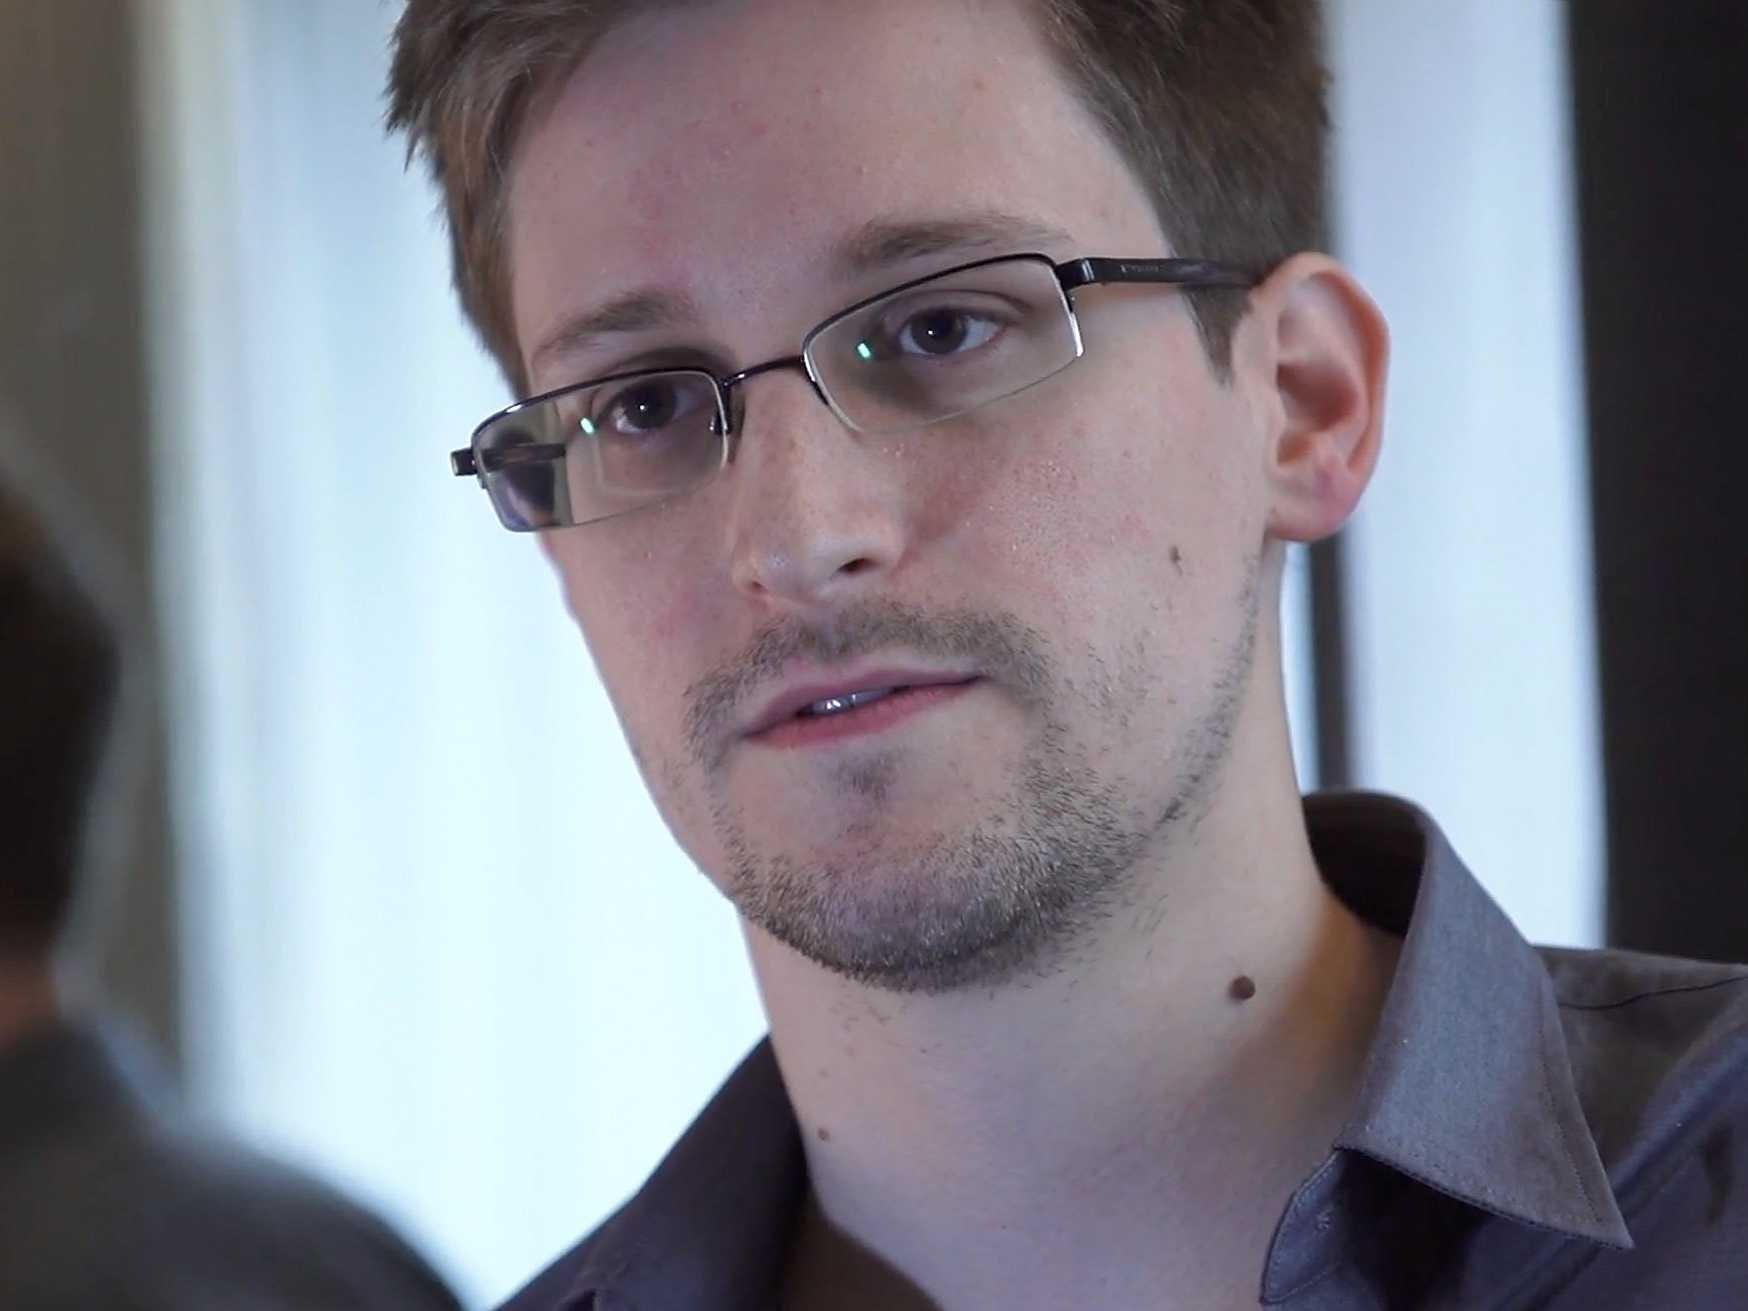 wikileaks-edward-snowden-has-requested-asylum-in-6-more-countries-but-were-not-saying-which-ones.jpg